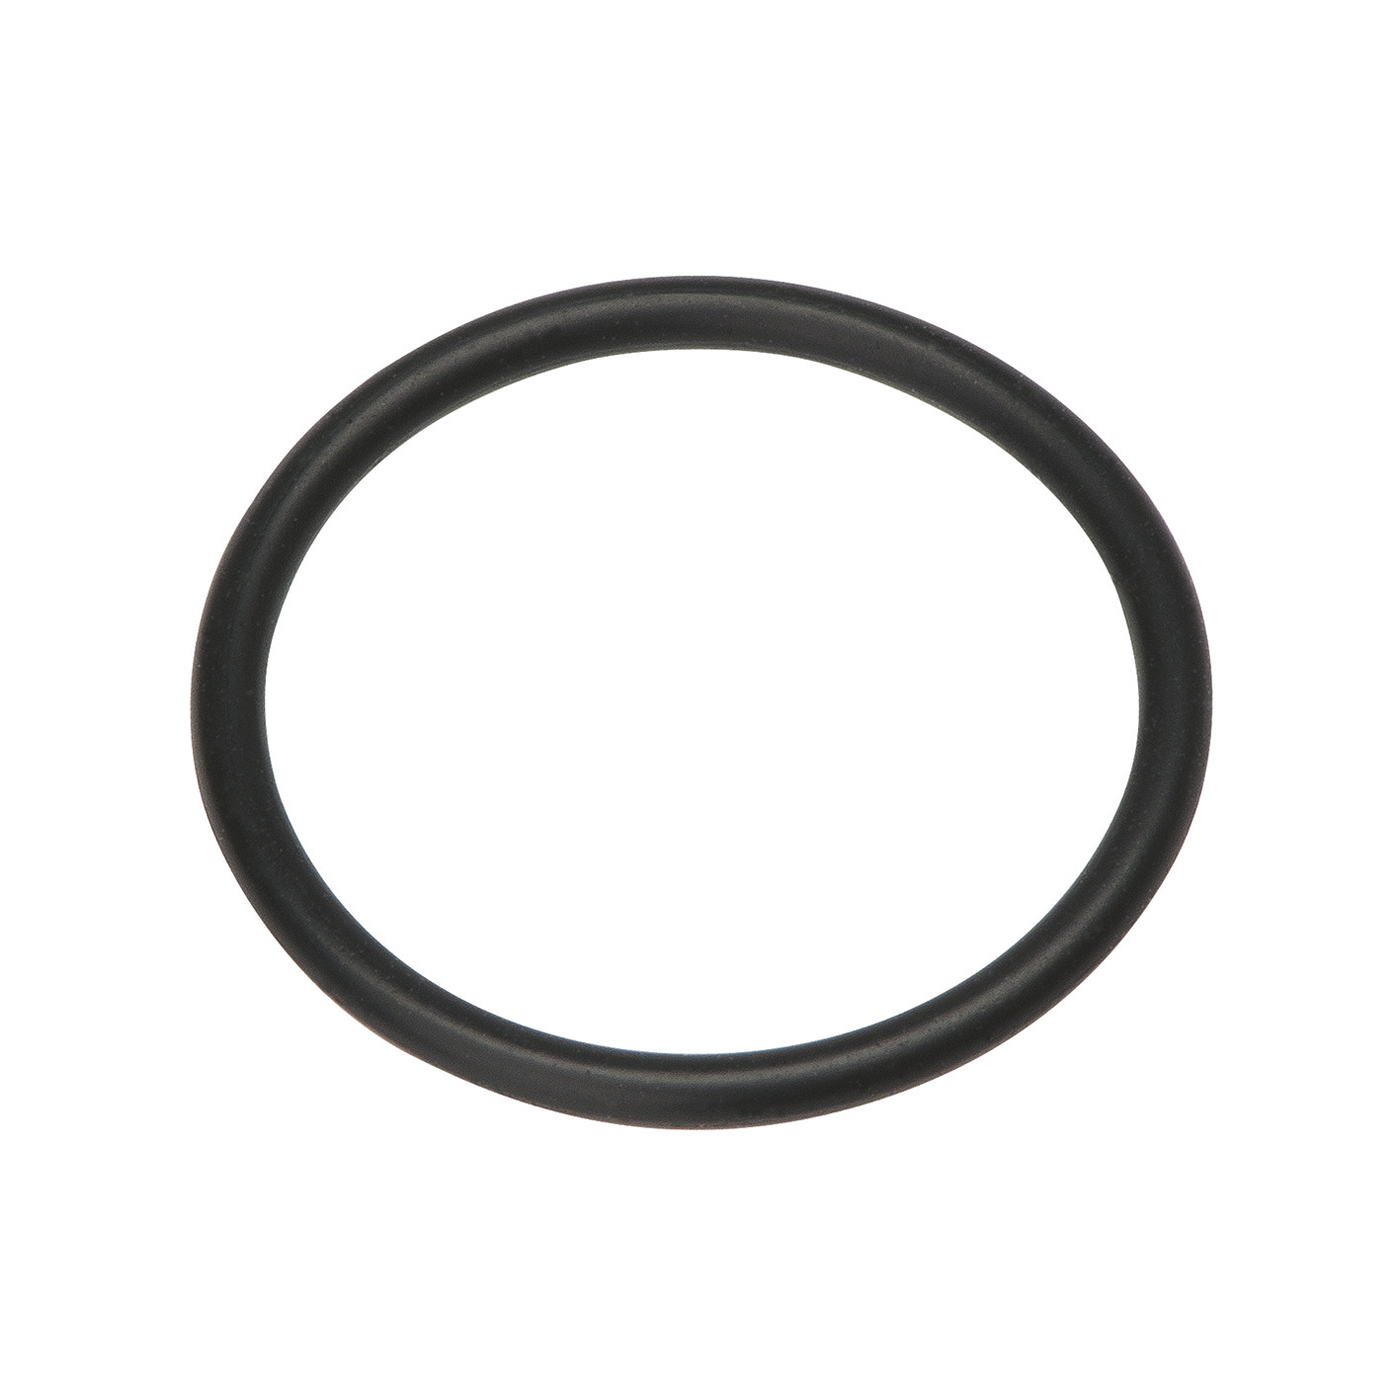 O-Ring, for Fine Welding Nozzle, for PUK - 1 piece